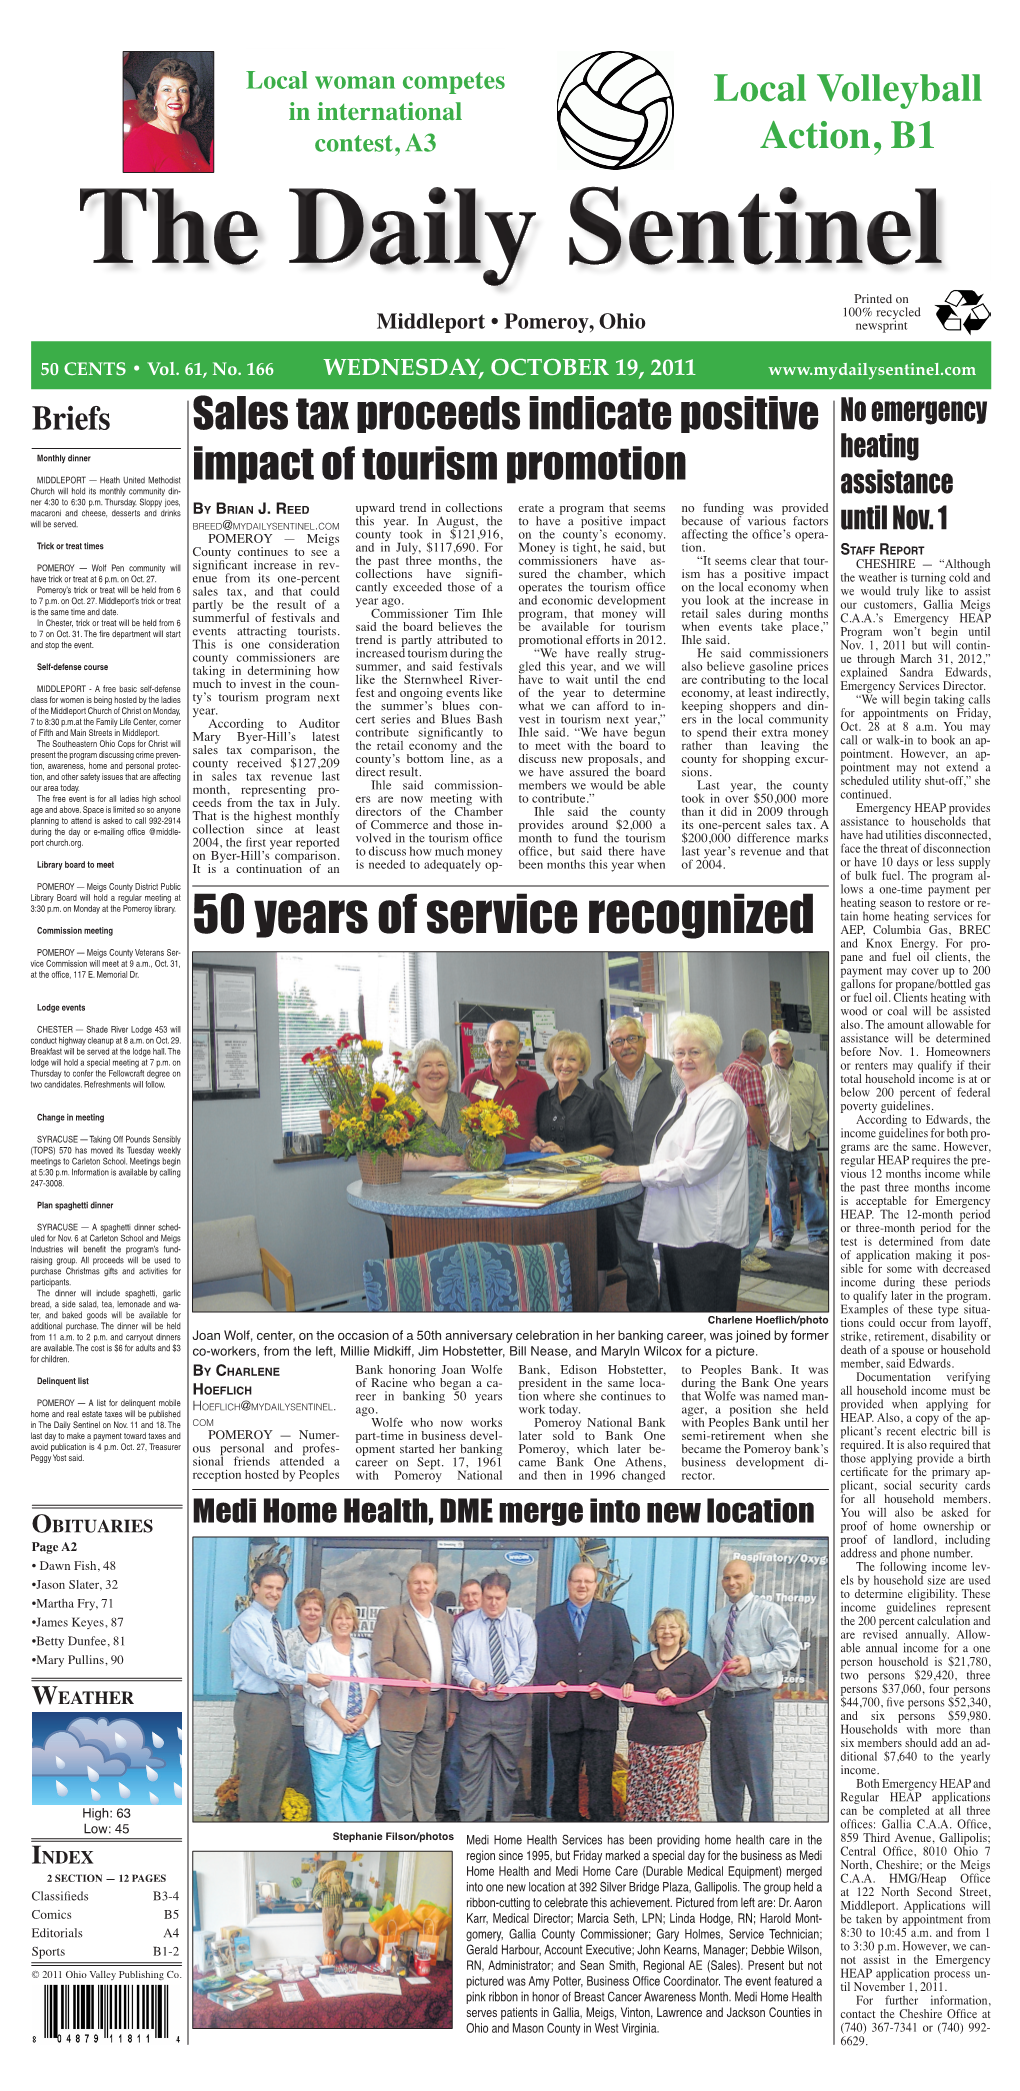 50 Years of Service Recognized AEP, Columbia Gas, BREC and Knox Energy